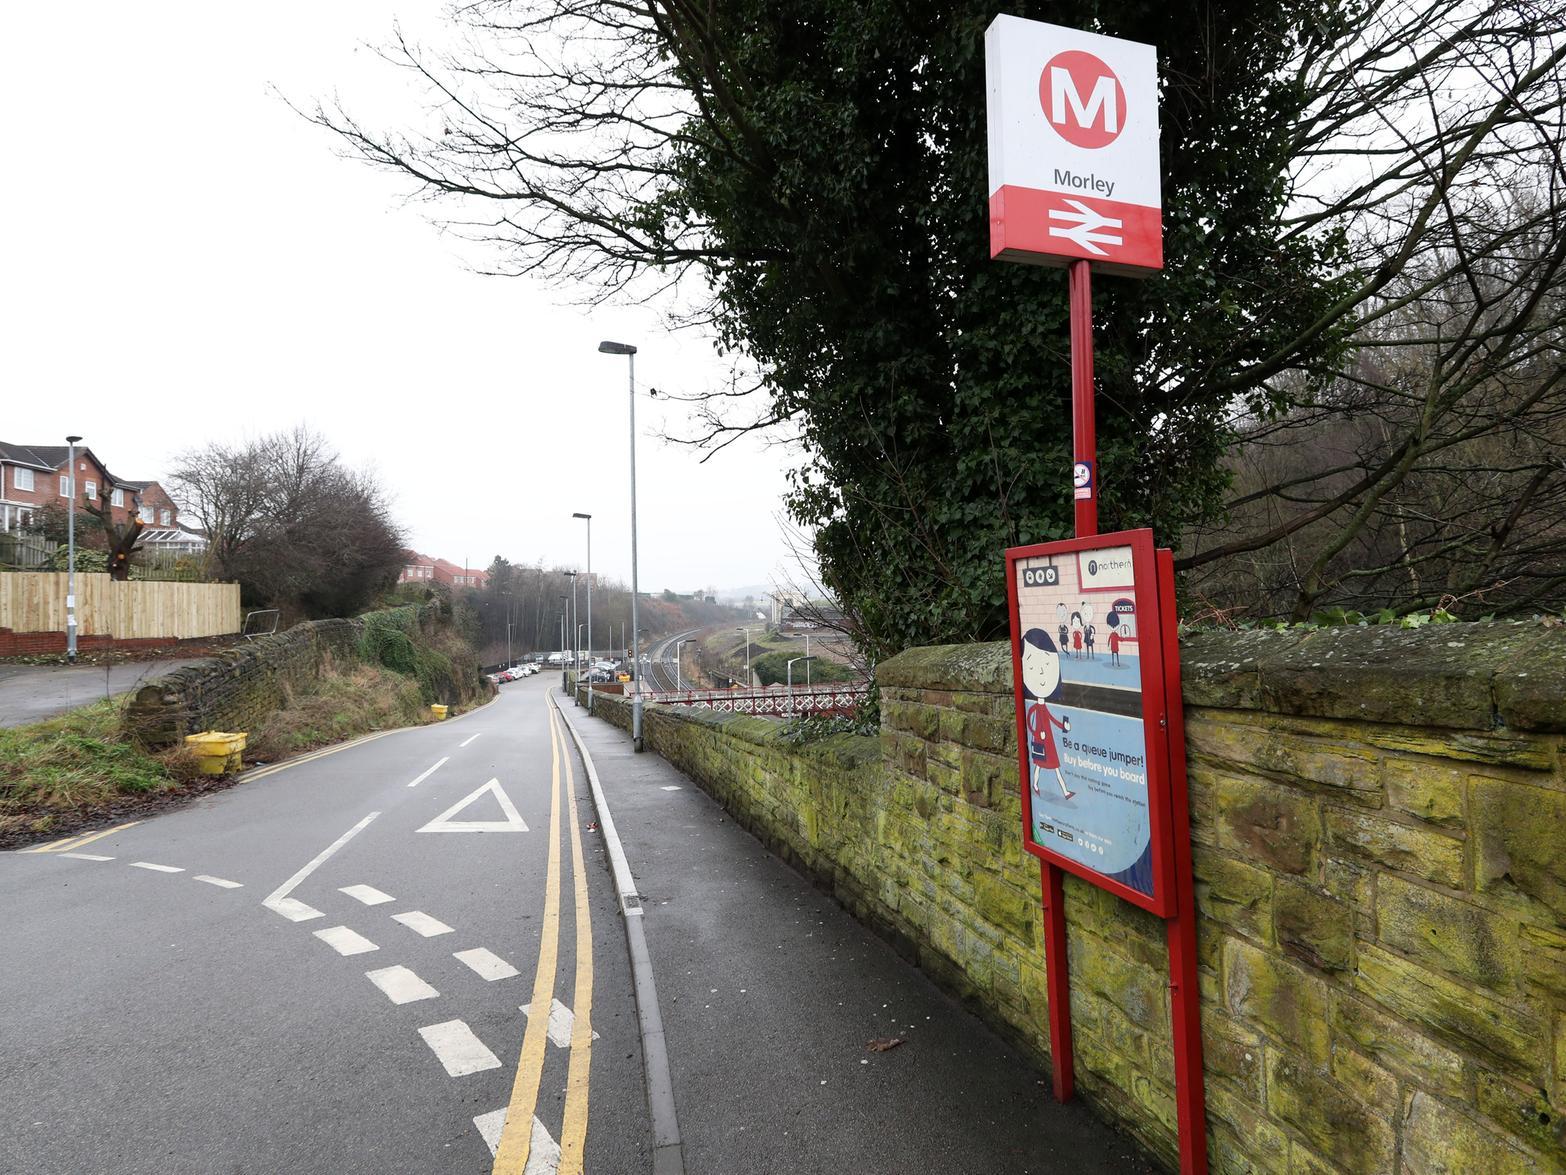 34 reports of anti-social behaviour in Morley and the surrounding area in December 2019